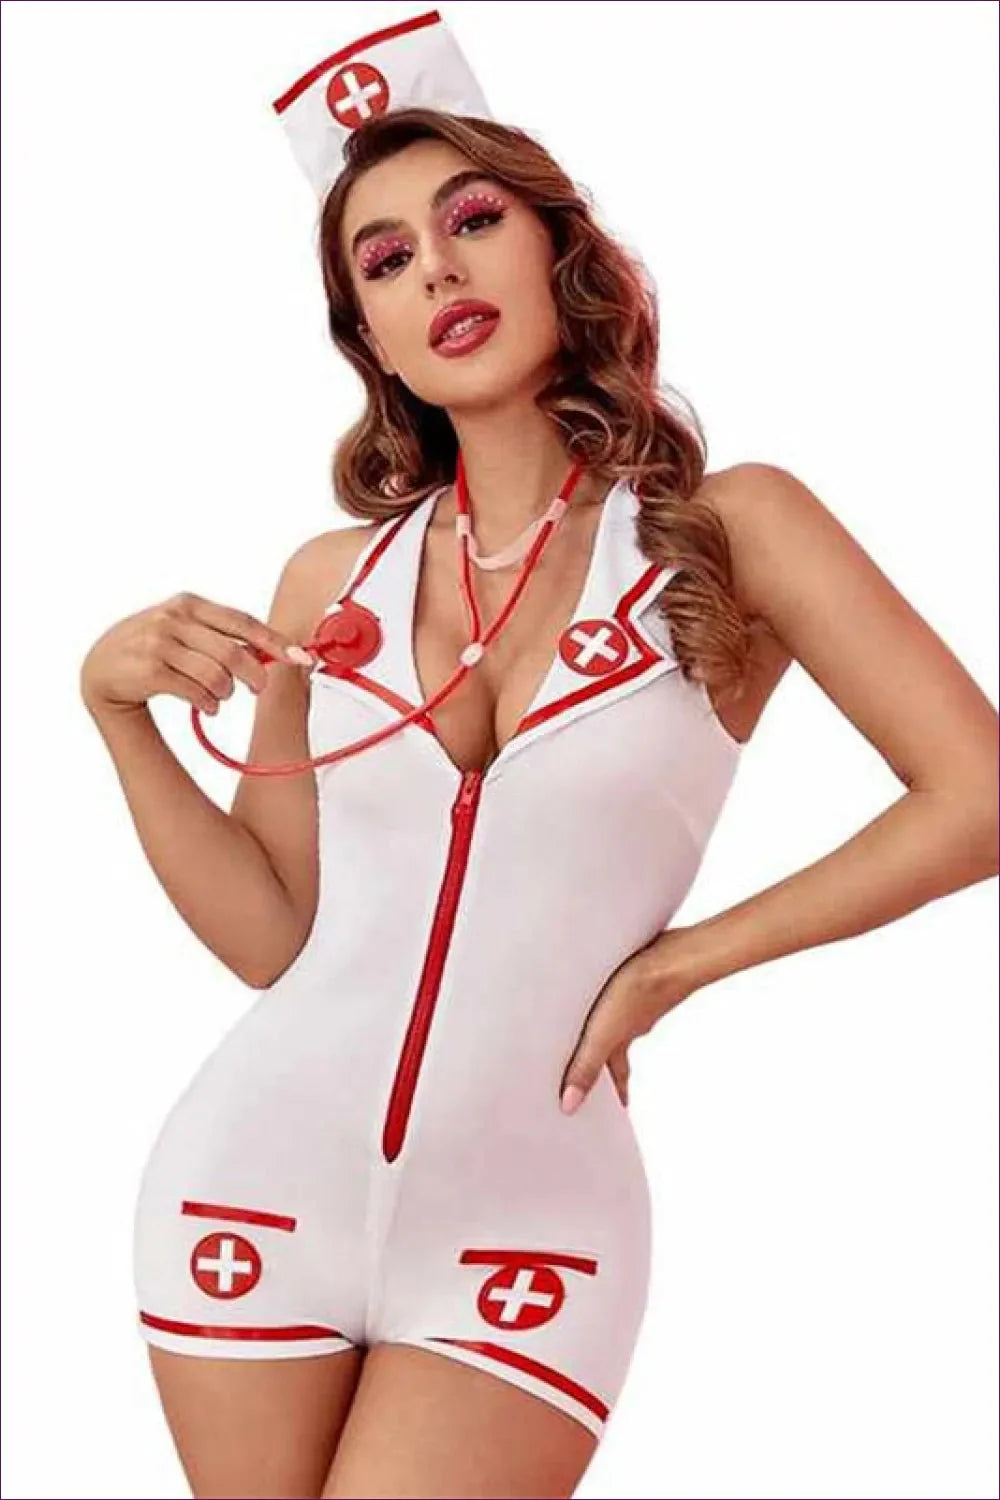 Innovative, Naughty Trimmings, Classic Nurse Silhouette! Boost Your Roleplay Encounters With Tantalizing